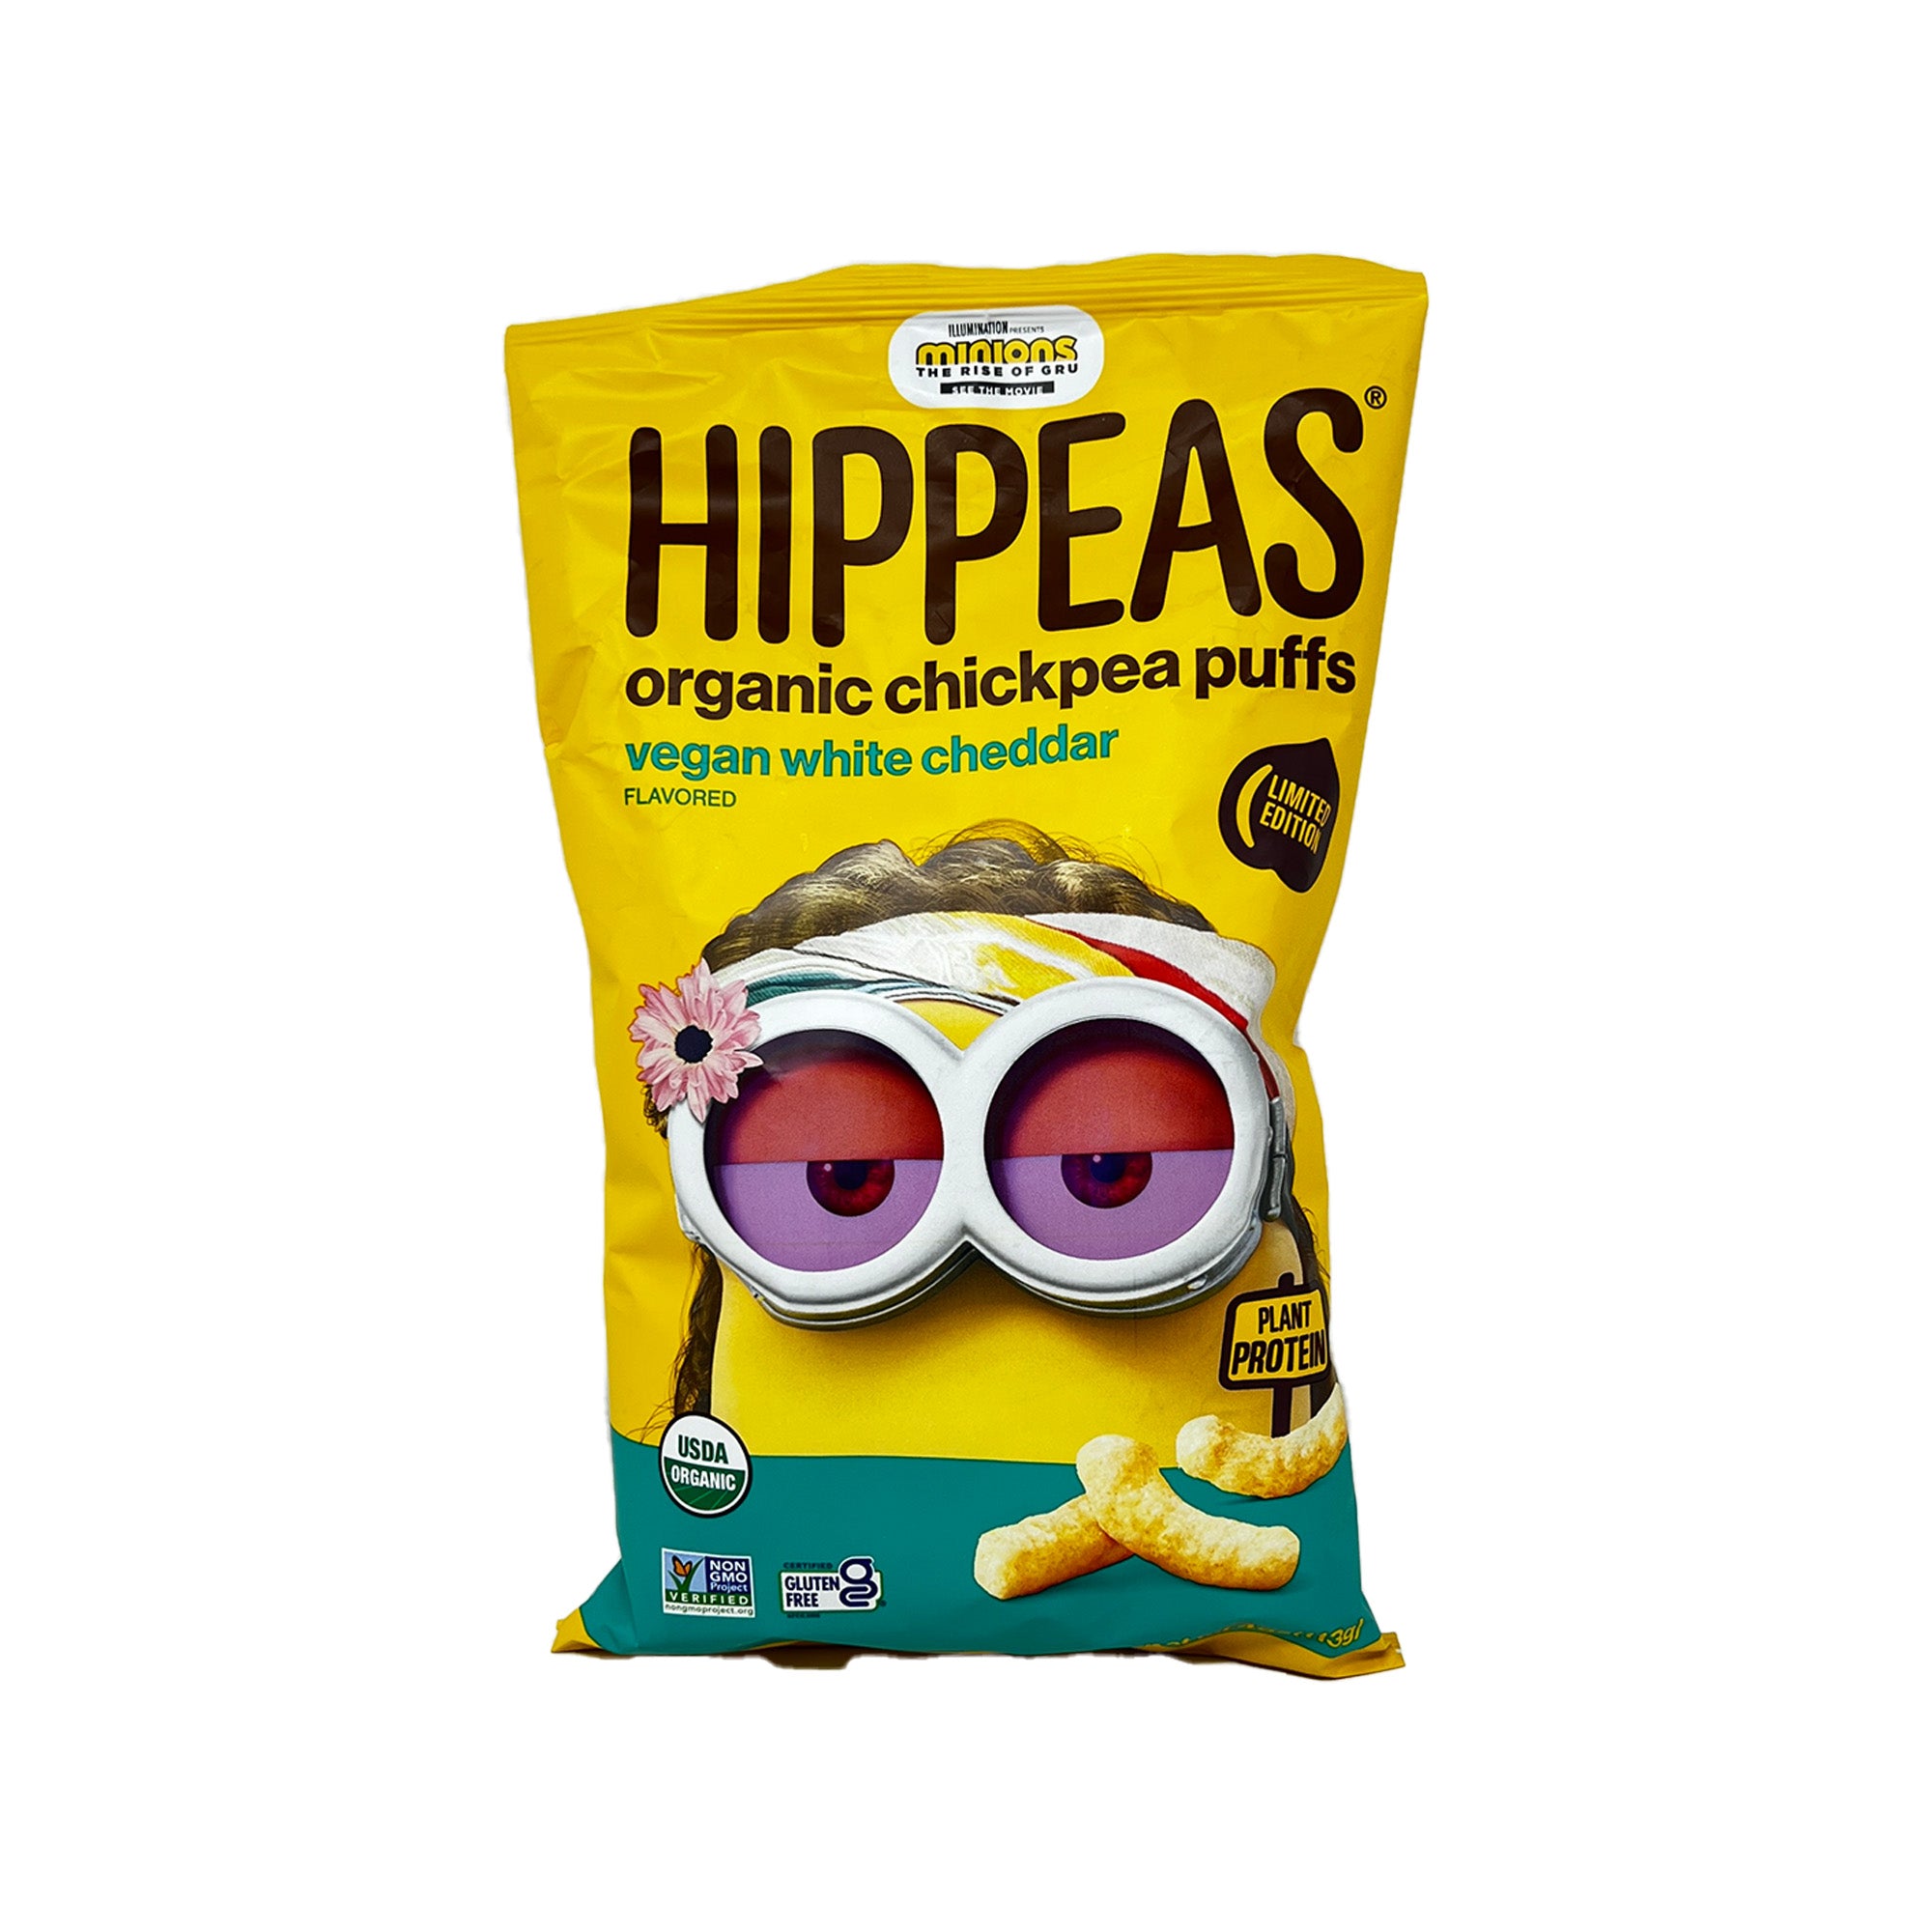 Hippeas Organic Chickpea Puffs, Limited Edition Minions: Rise of Gru, Vegan White Cheddar Flavored